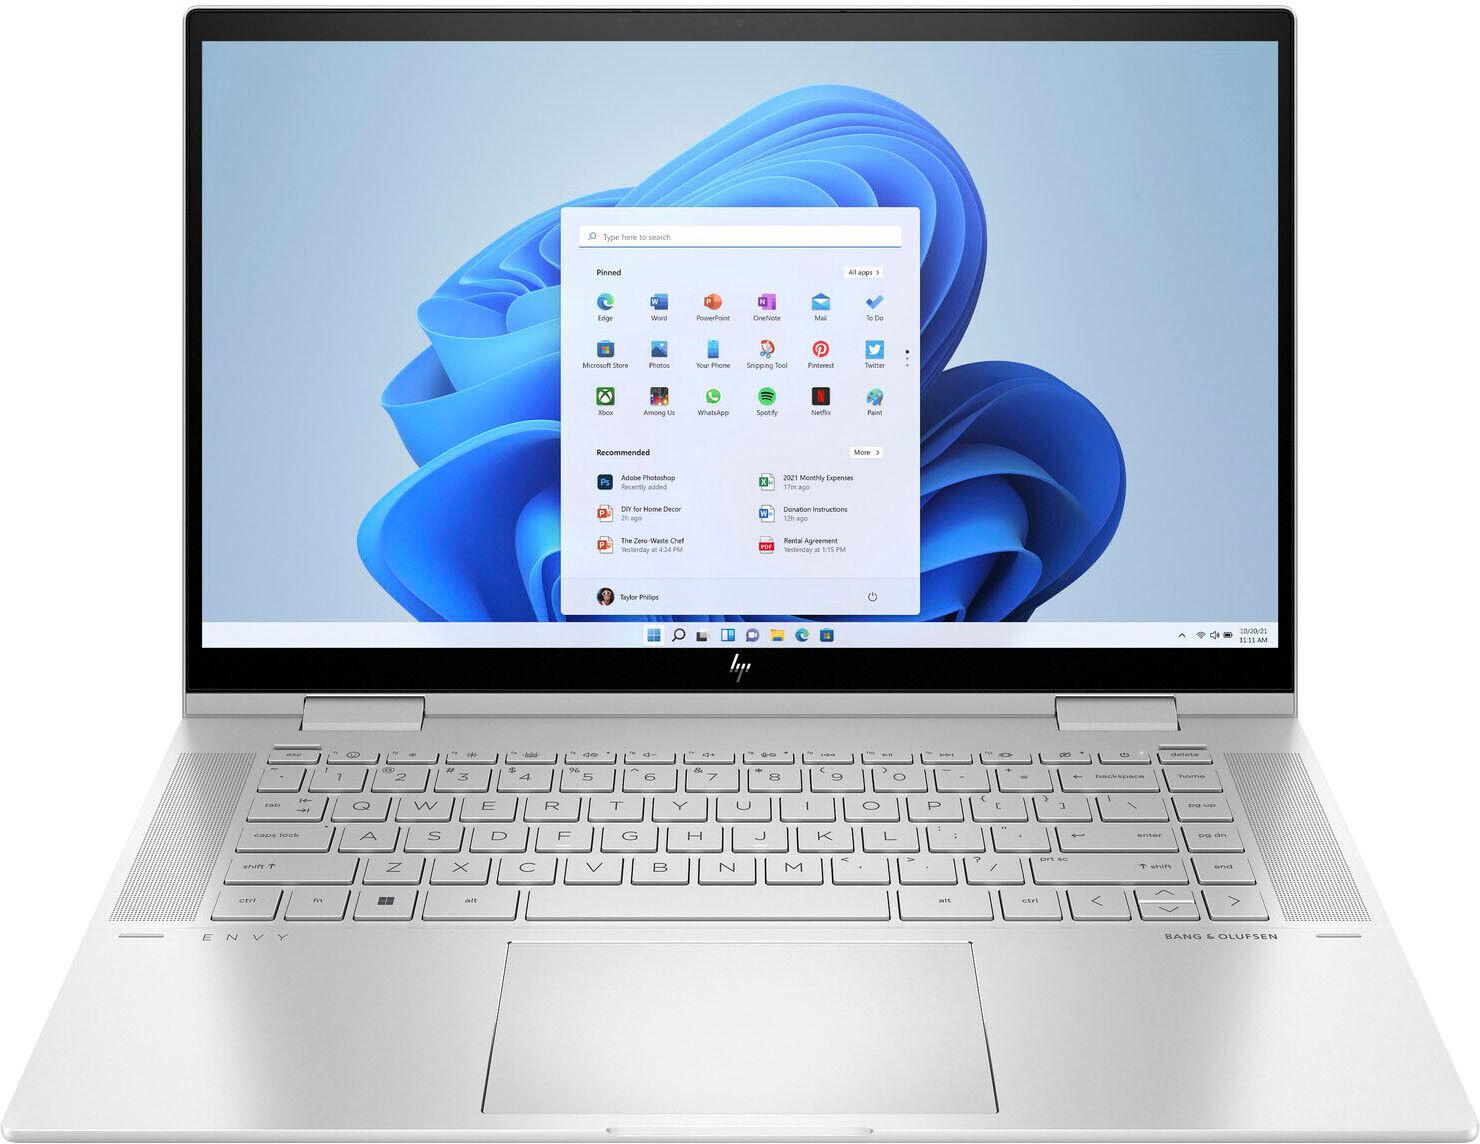 HP Envy x360 2-in-1 15.6in i7 16GB 512GB Notebook Laptop for $799.99 Shipped